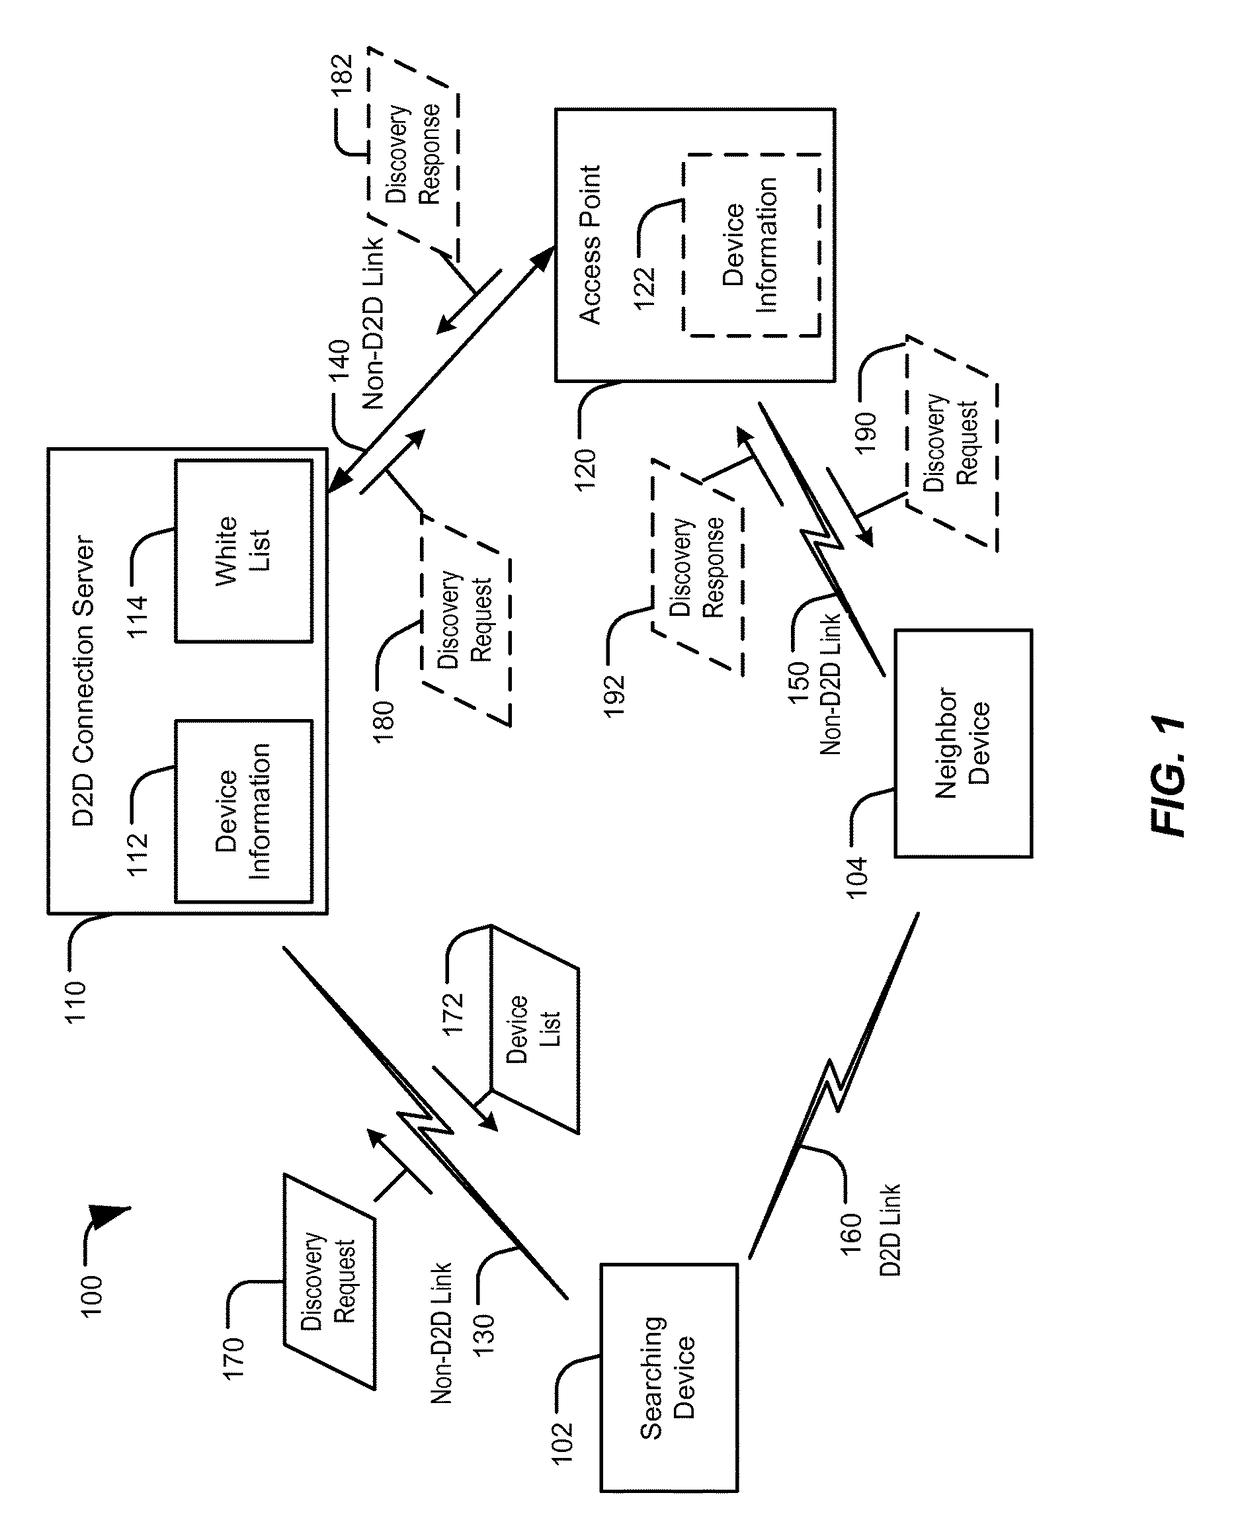 Server-assisted device-to-device discovery and connection